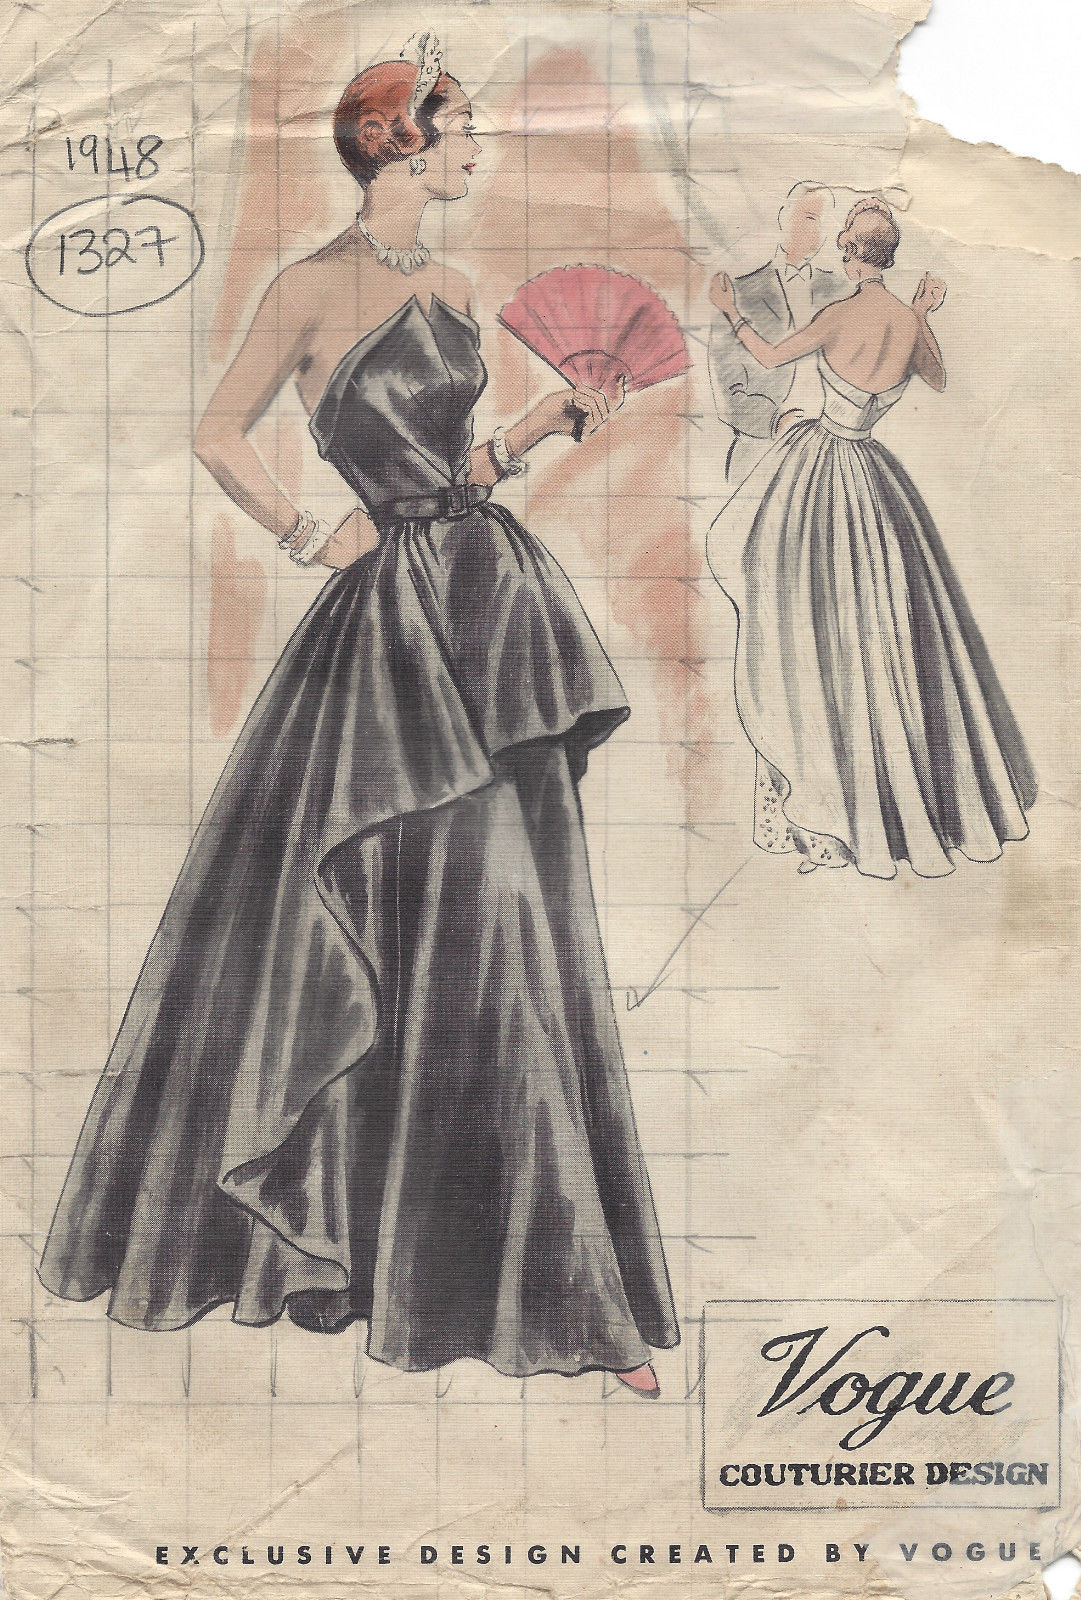 1950s Pattern, Strapless Ball Gown, Prom Dress, Bridal Gown - Bust 32